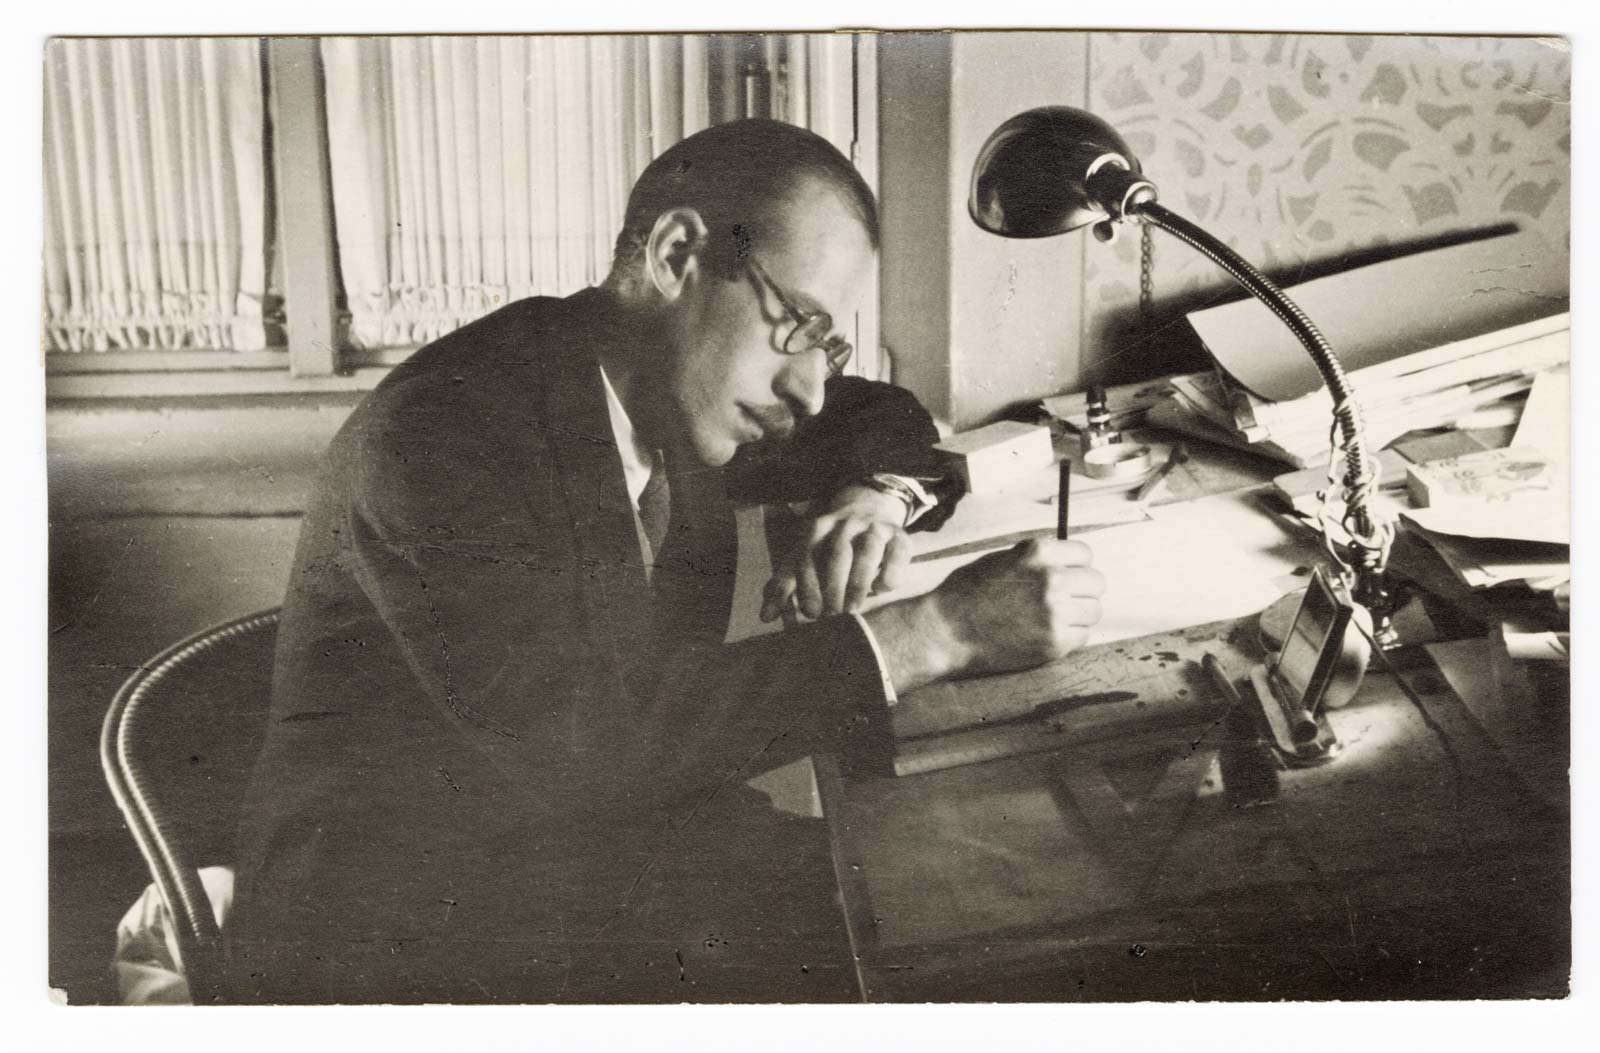 Steinberg at his drawing table in his room above the Bar Il Grillo, Milan, c. 1937. Saul Steinberg Papers, Beinecke Rare Book and Manuscript Library, Yale University.